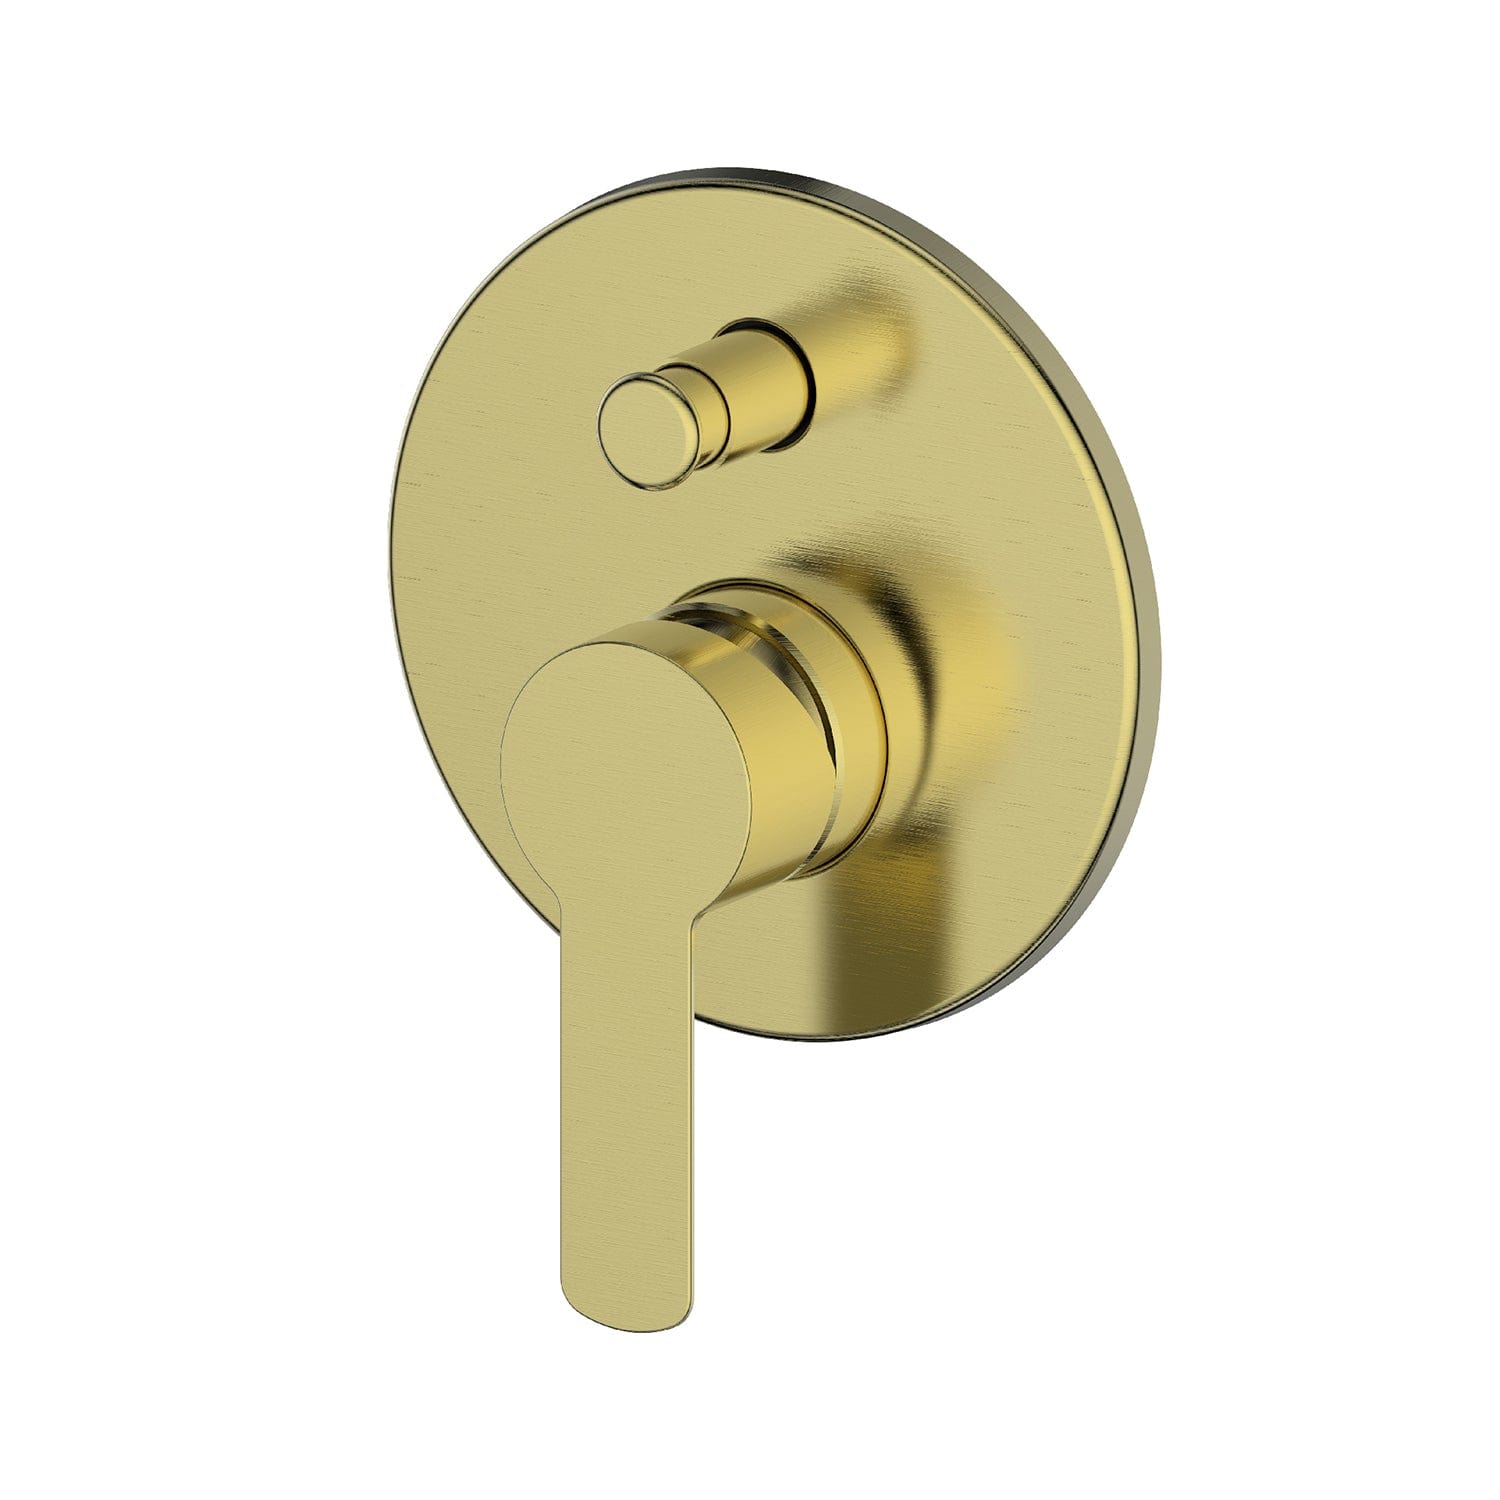 Greens Shower Mixer Greens Astro II Shower Mixer with Diverter | Brushed Brass